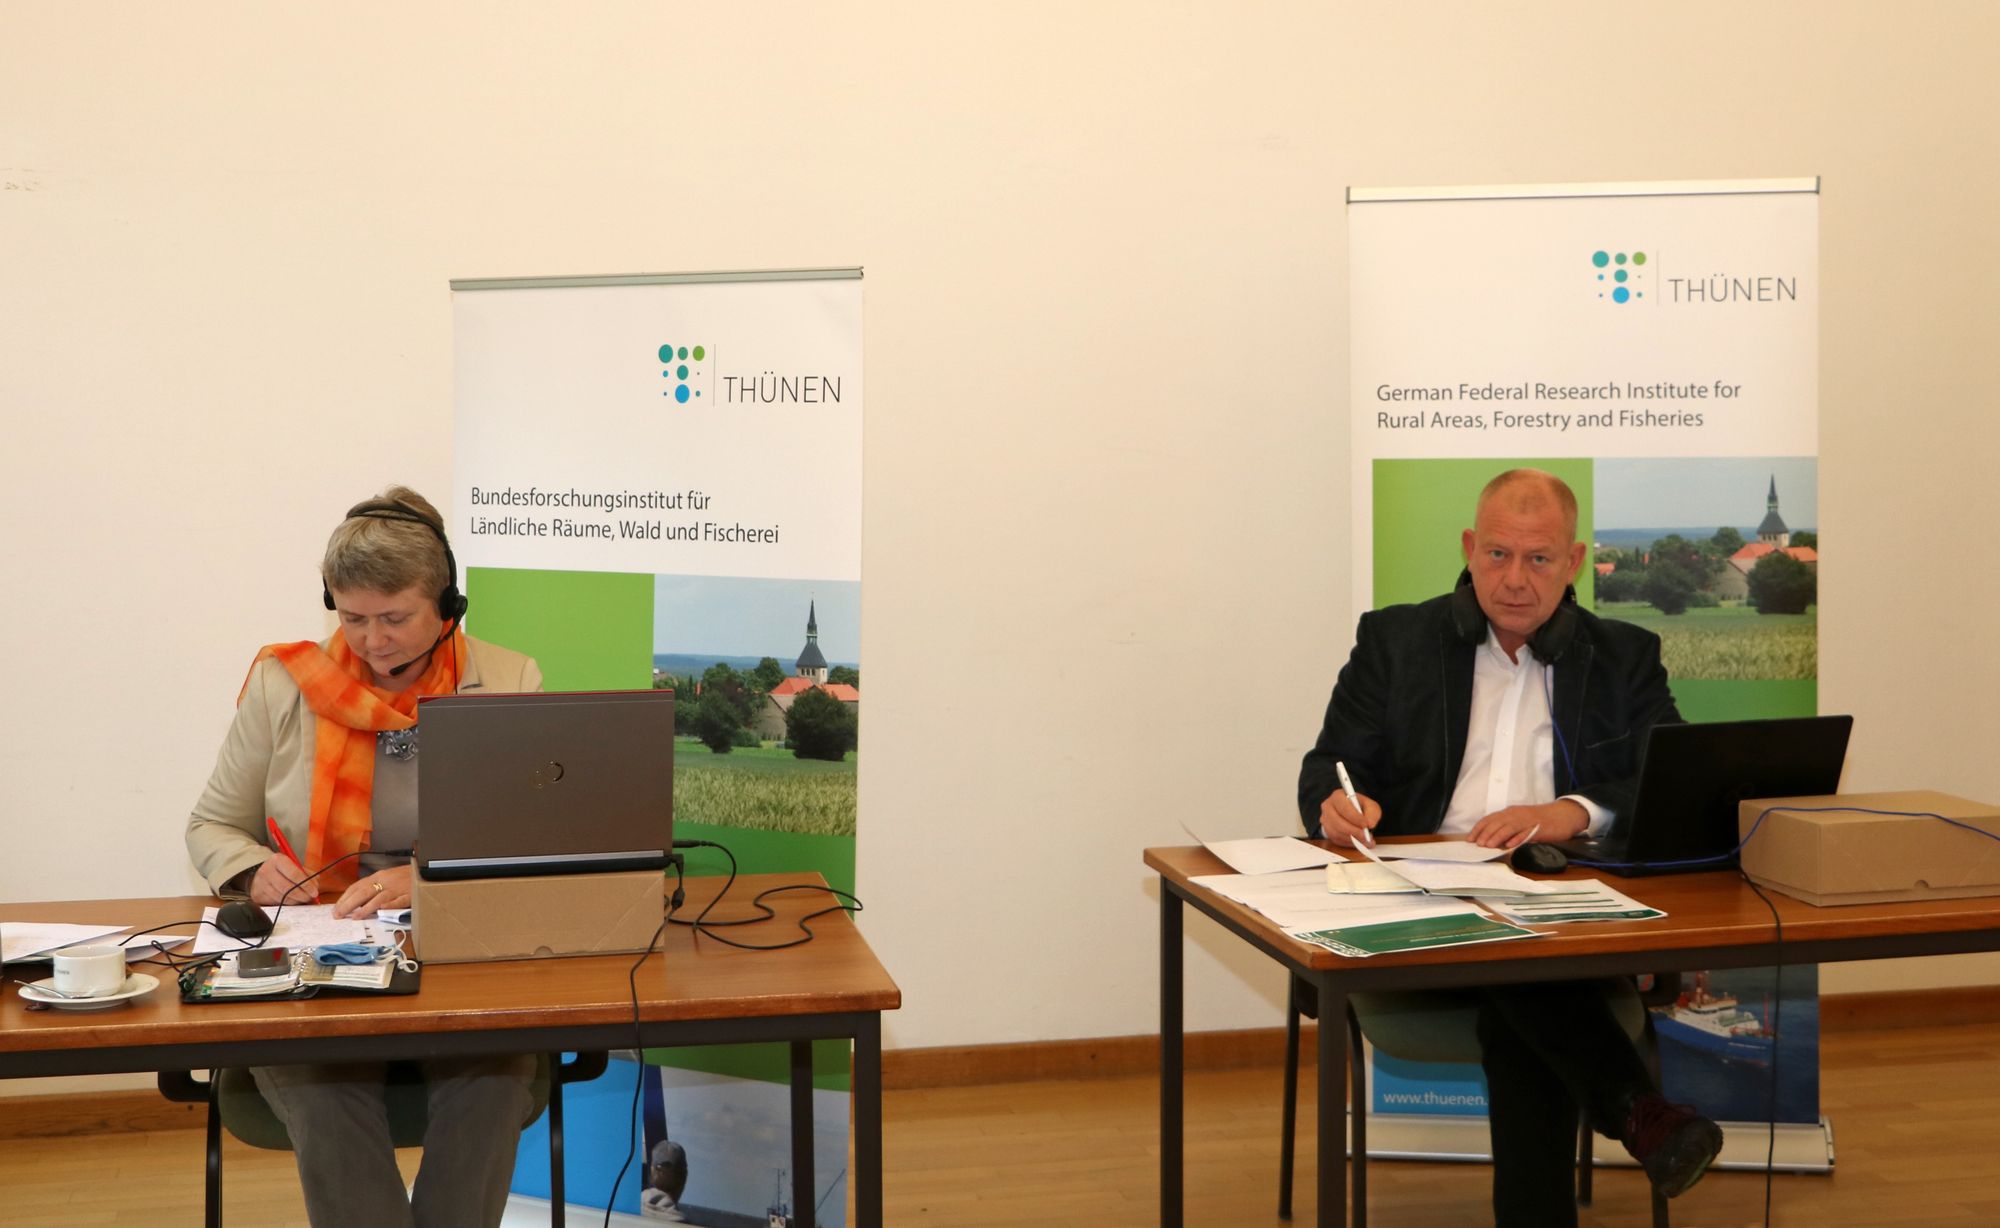 Stefan Lange und Felicitas Schneider from Thünen Institute co-organised the workshop and acted virtually as moderator.